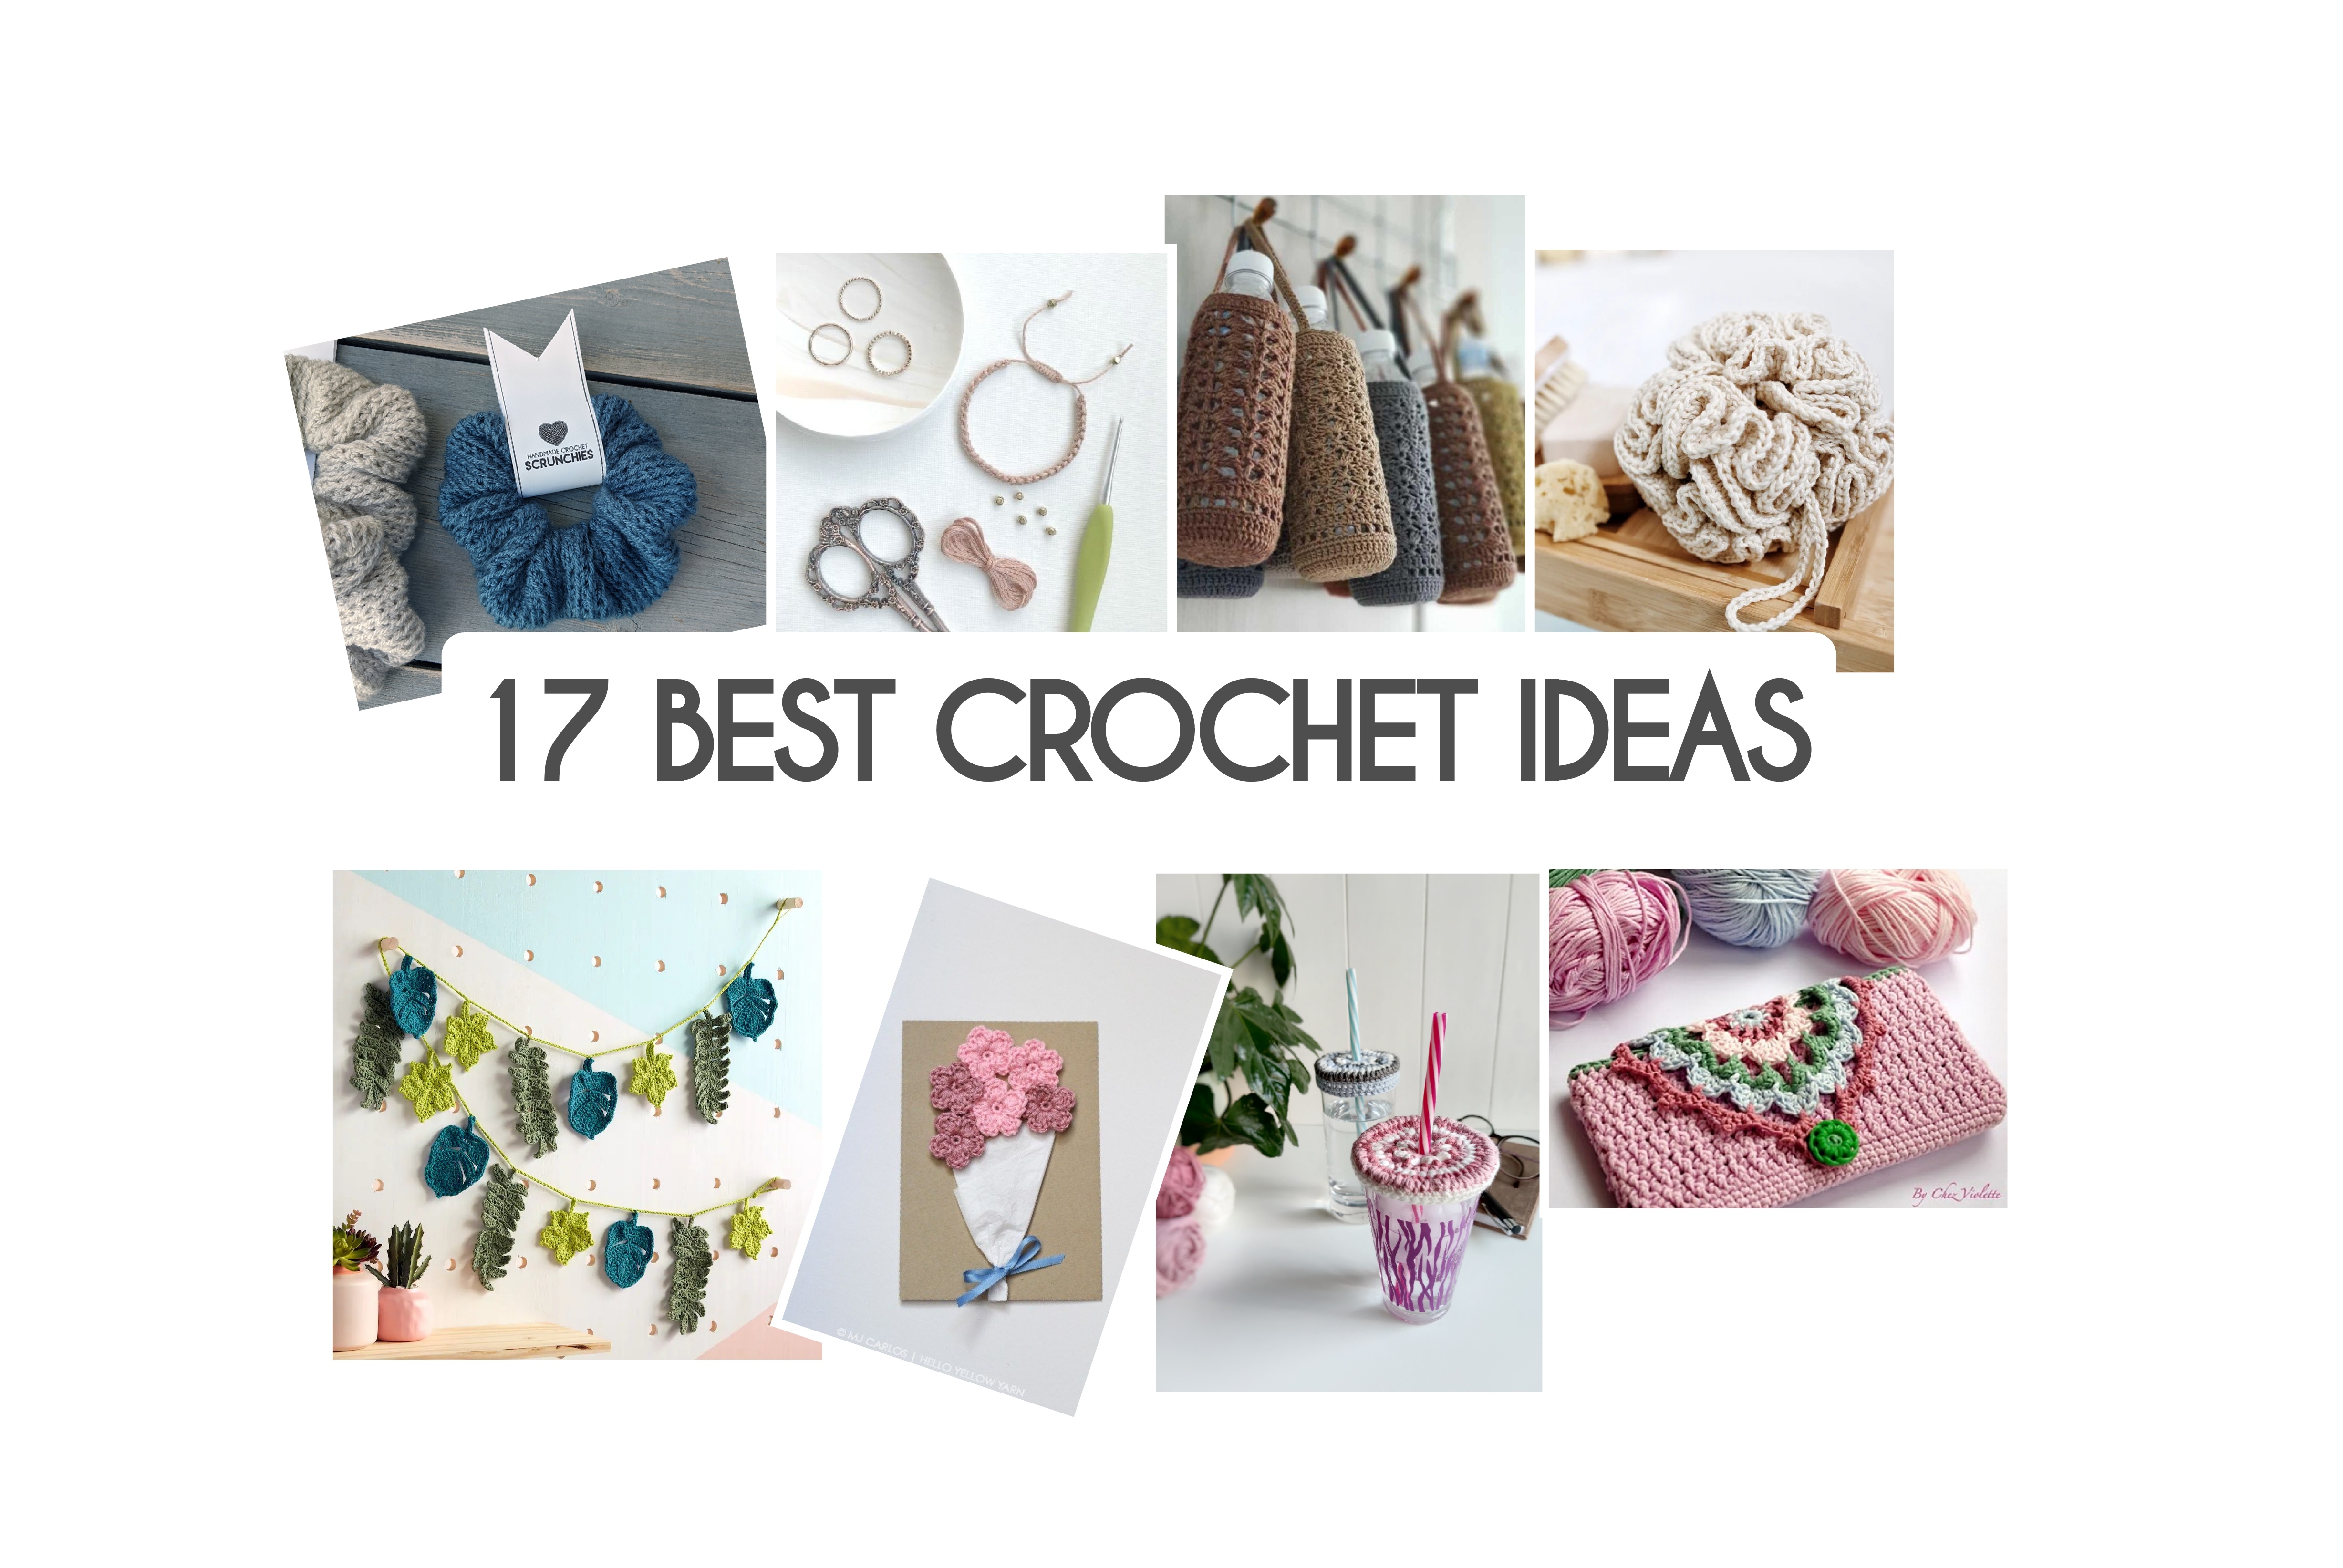 8 Crochet Hacks to Make Crocheting Easier - Tea and a Sewing Machine